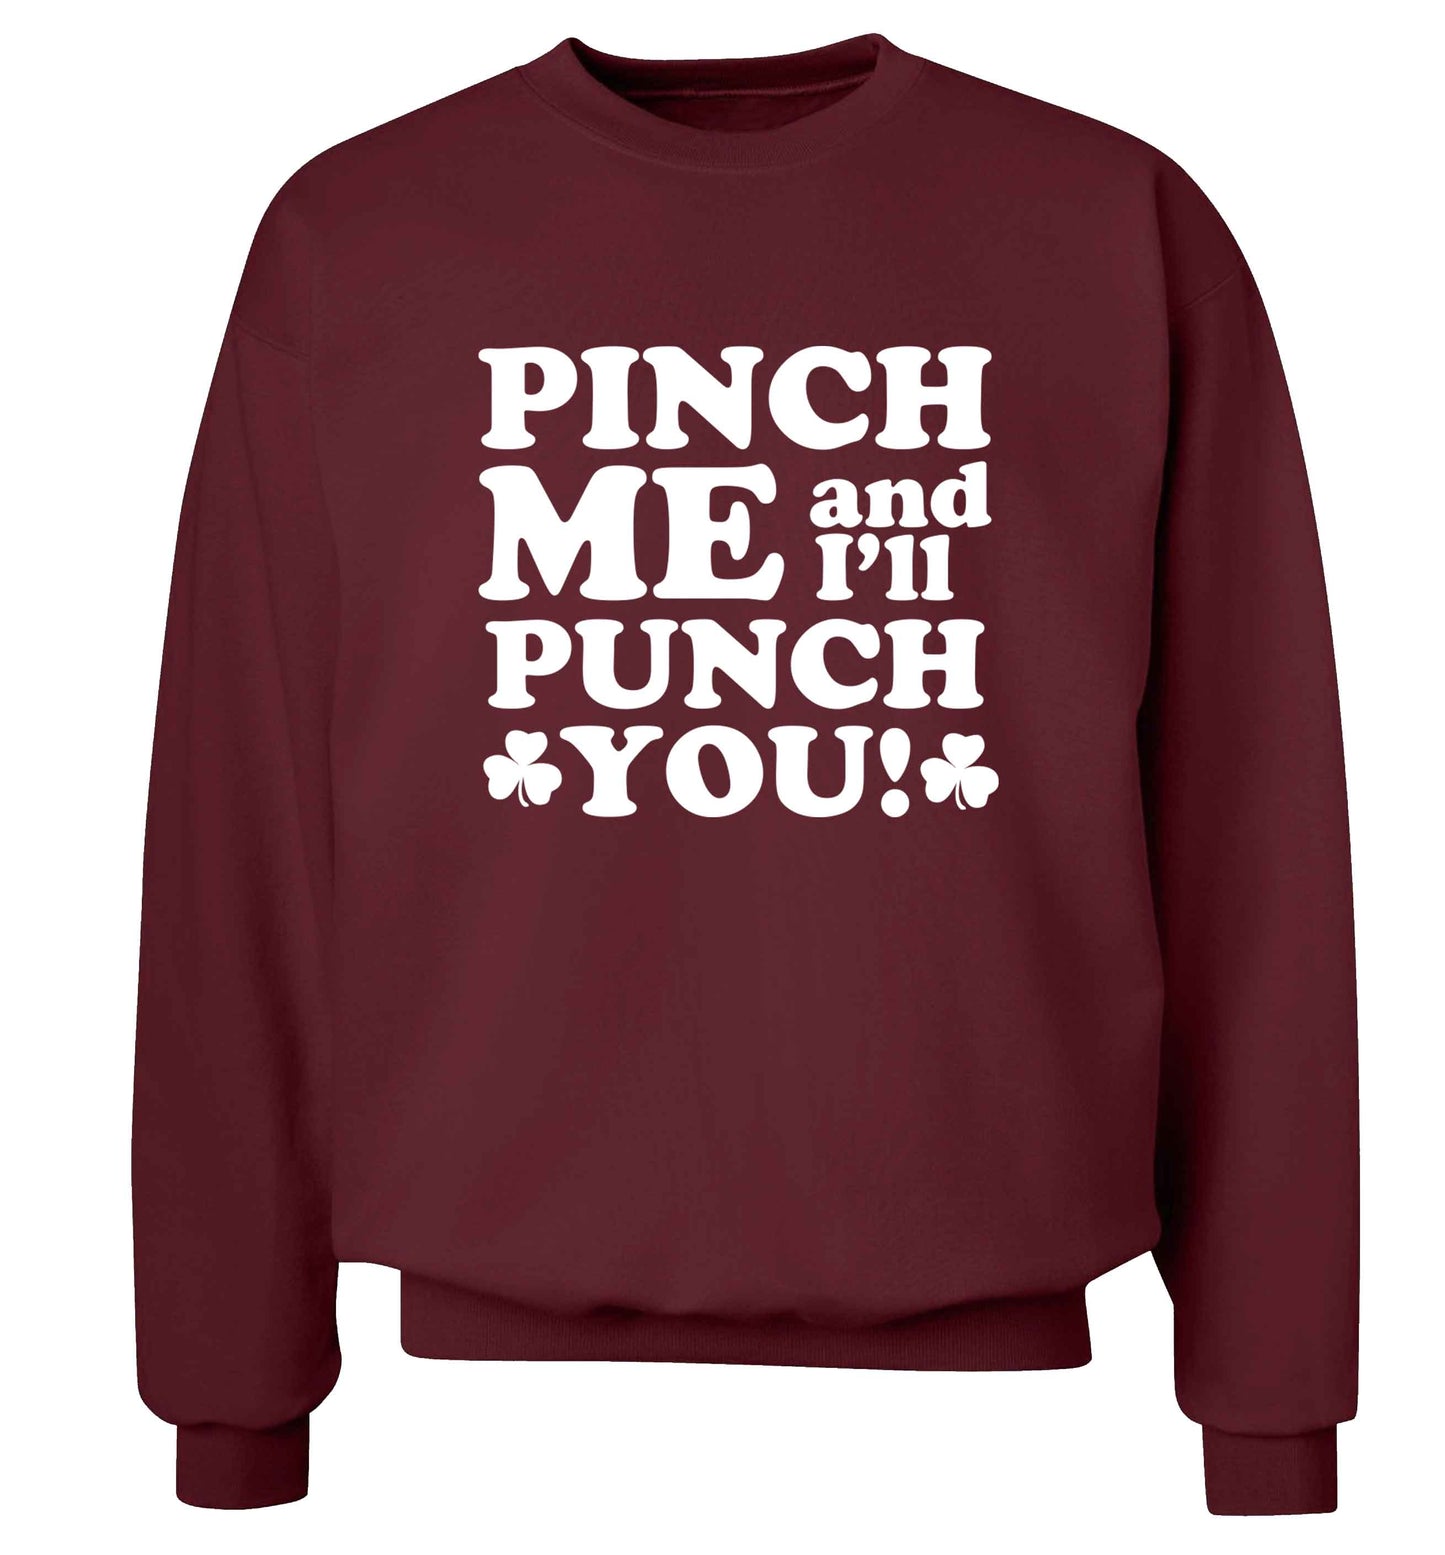 Pinch me and I'll punch you adult's unisex maroon sweater 2XL